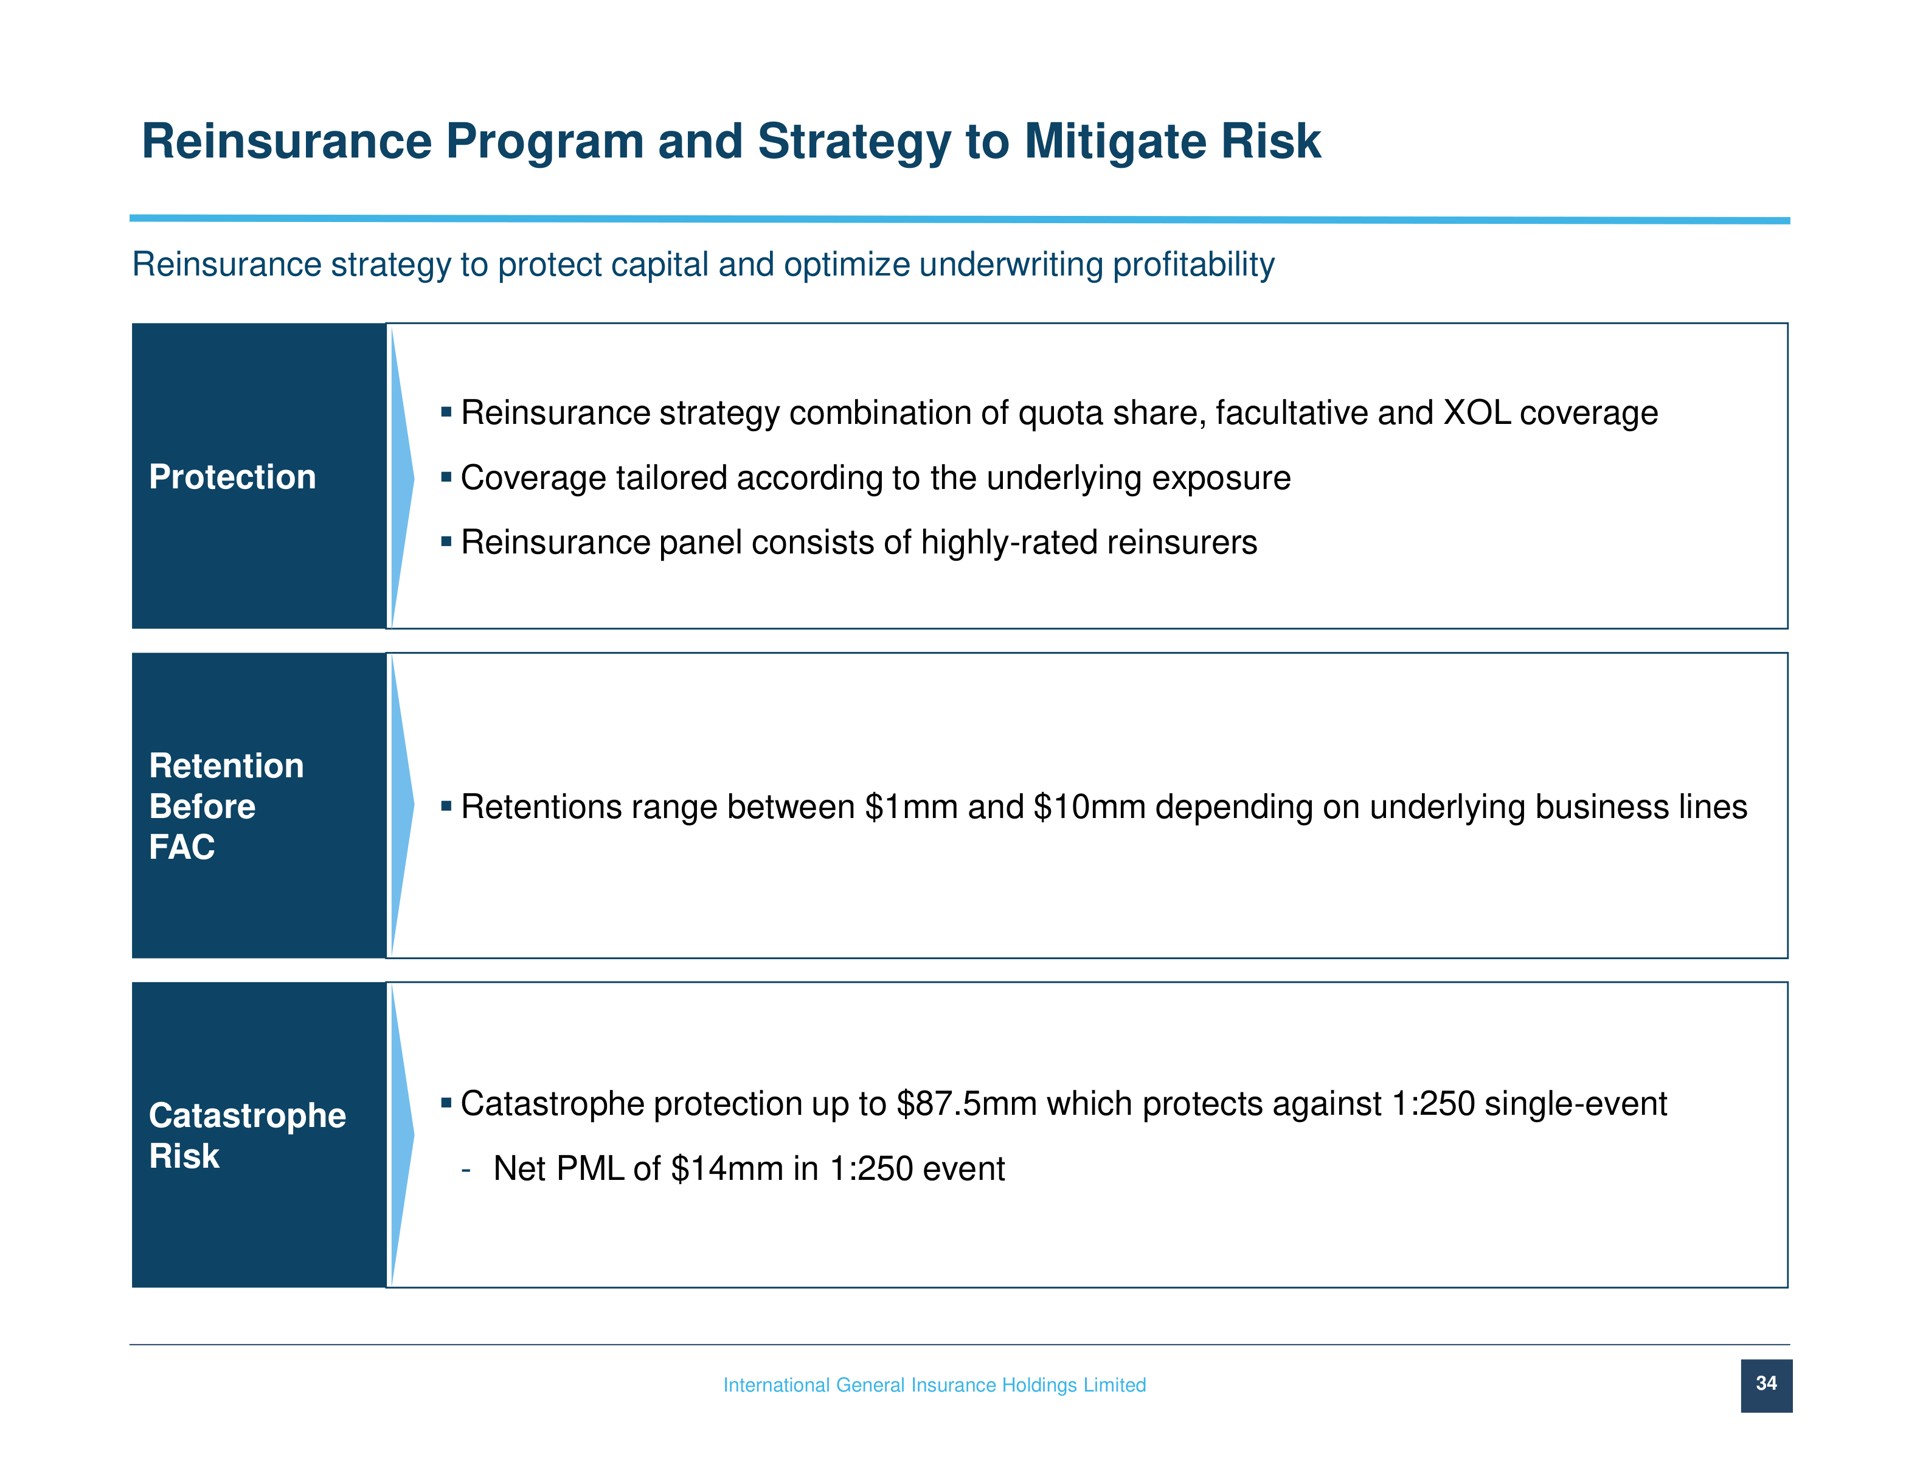 reinsurance program and strategy to mitigate risk reinsurance strategy to protect capital and optimize underwriting profitability reinsurance strategy combination of quota share facultative and coverage protection coverage tailored according to the underlying exposure reinsurance panel consists of highly rated retention before catastrophe risk retentions range between and depending on underlying business lines catastrophe protection up to which protects against single event net of in event | IGI